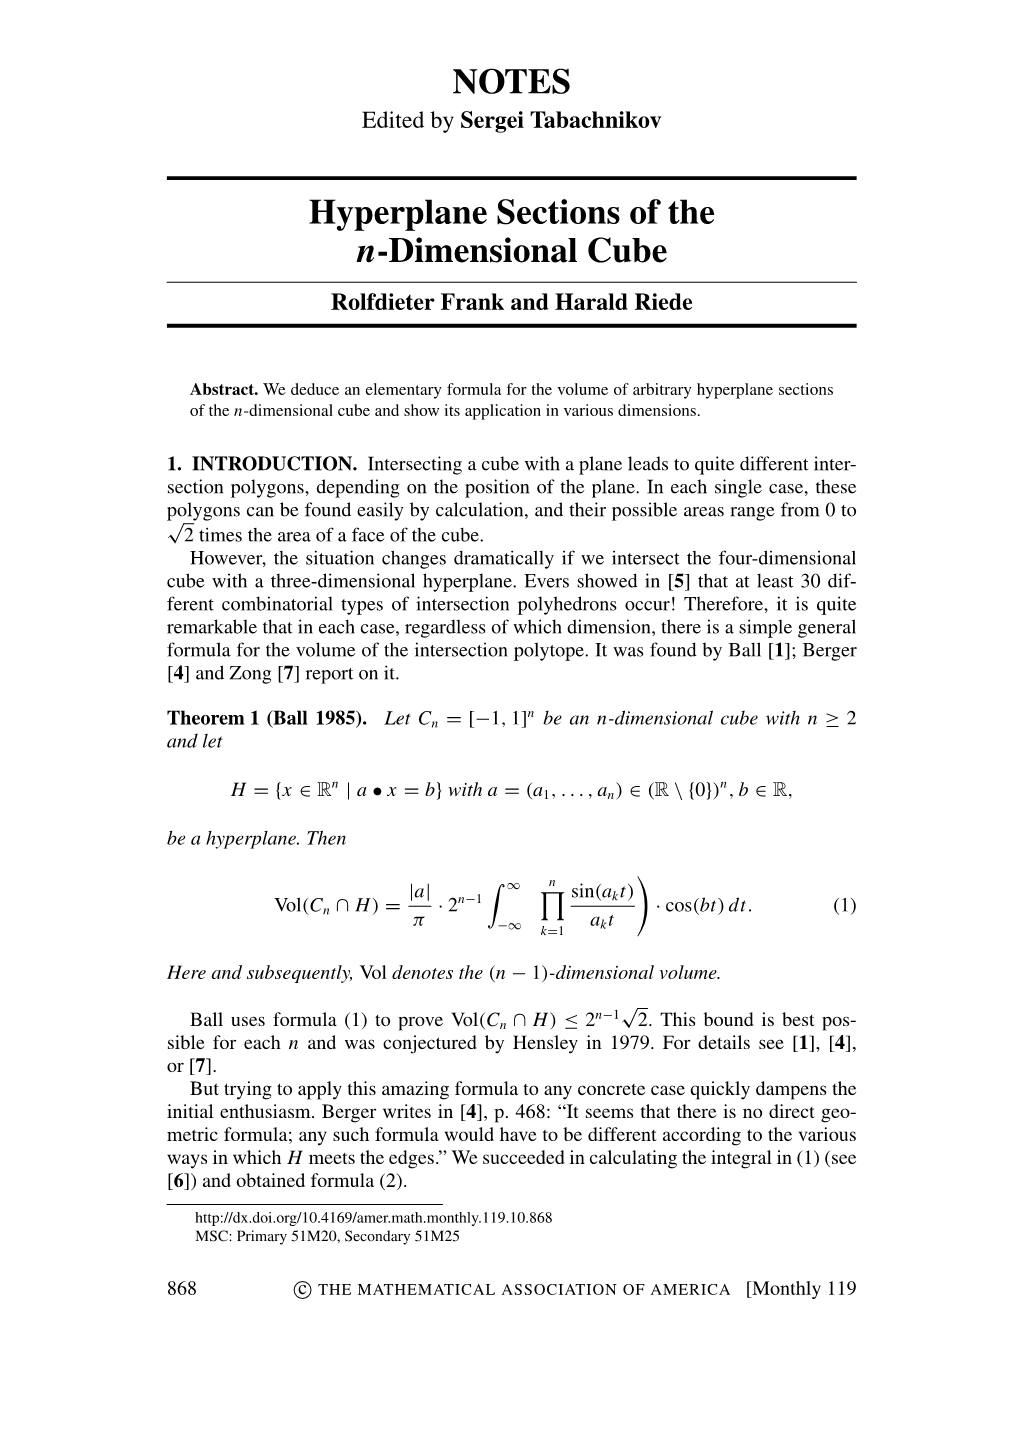 NOTES Hyperplane Sections of the N-Dimensional Cube